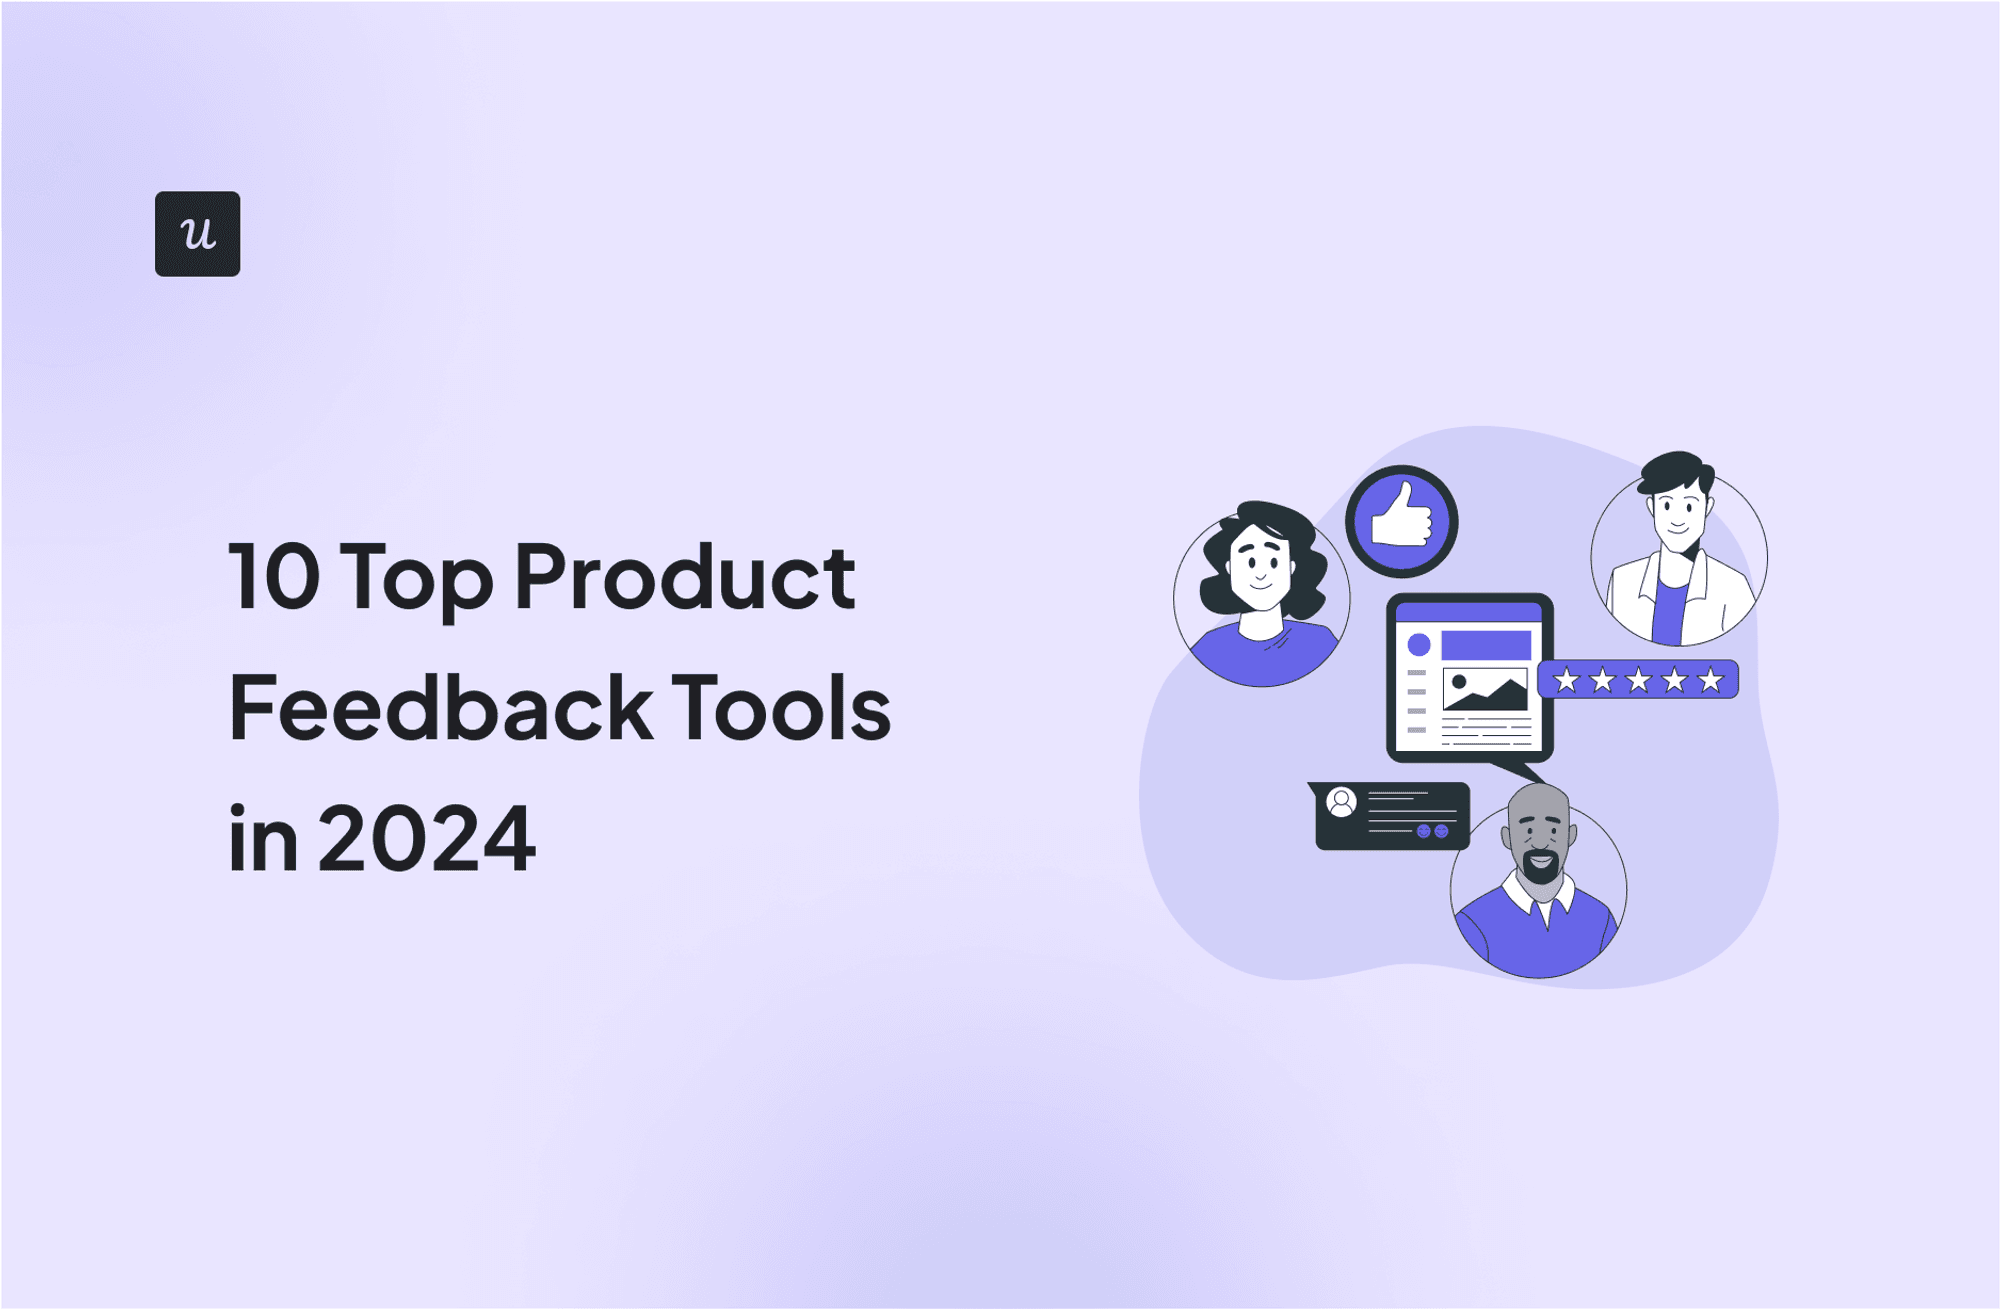 10 Top Product Feedback Tools in 2024 cover